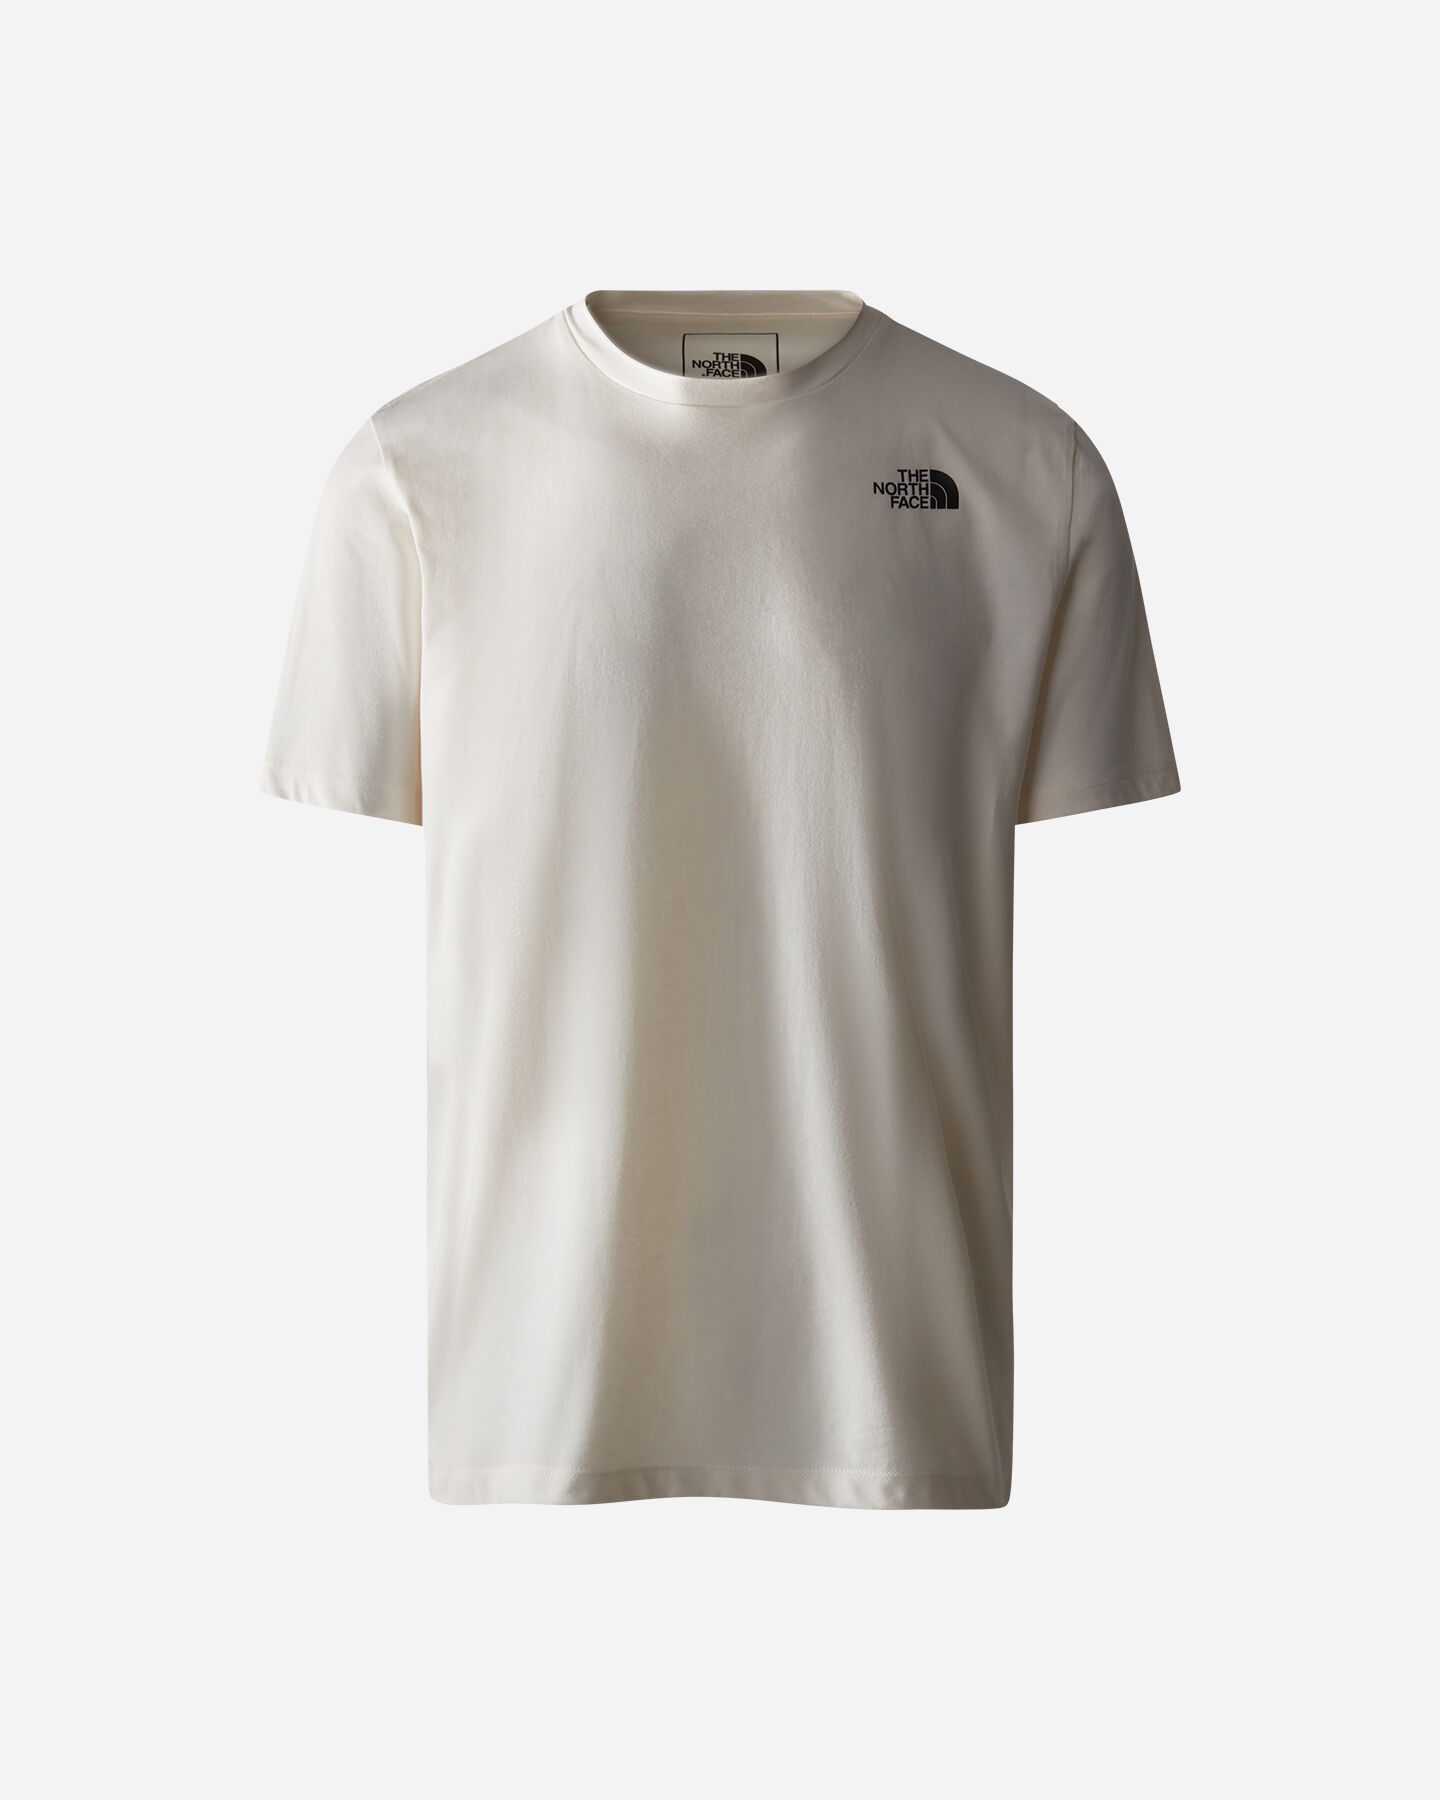  T-Shirt THE NORTH FACE FOUNDATION GRAPHIC M S5599498|V3L|S scatto 0